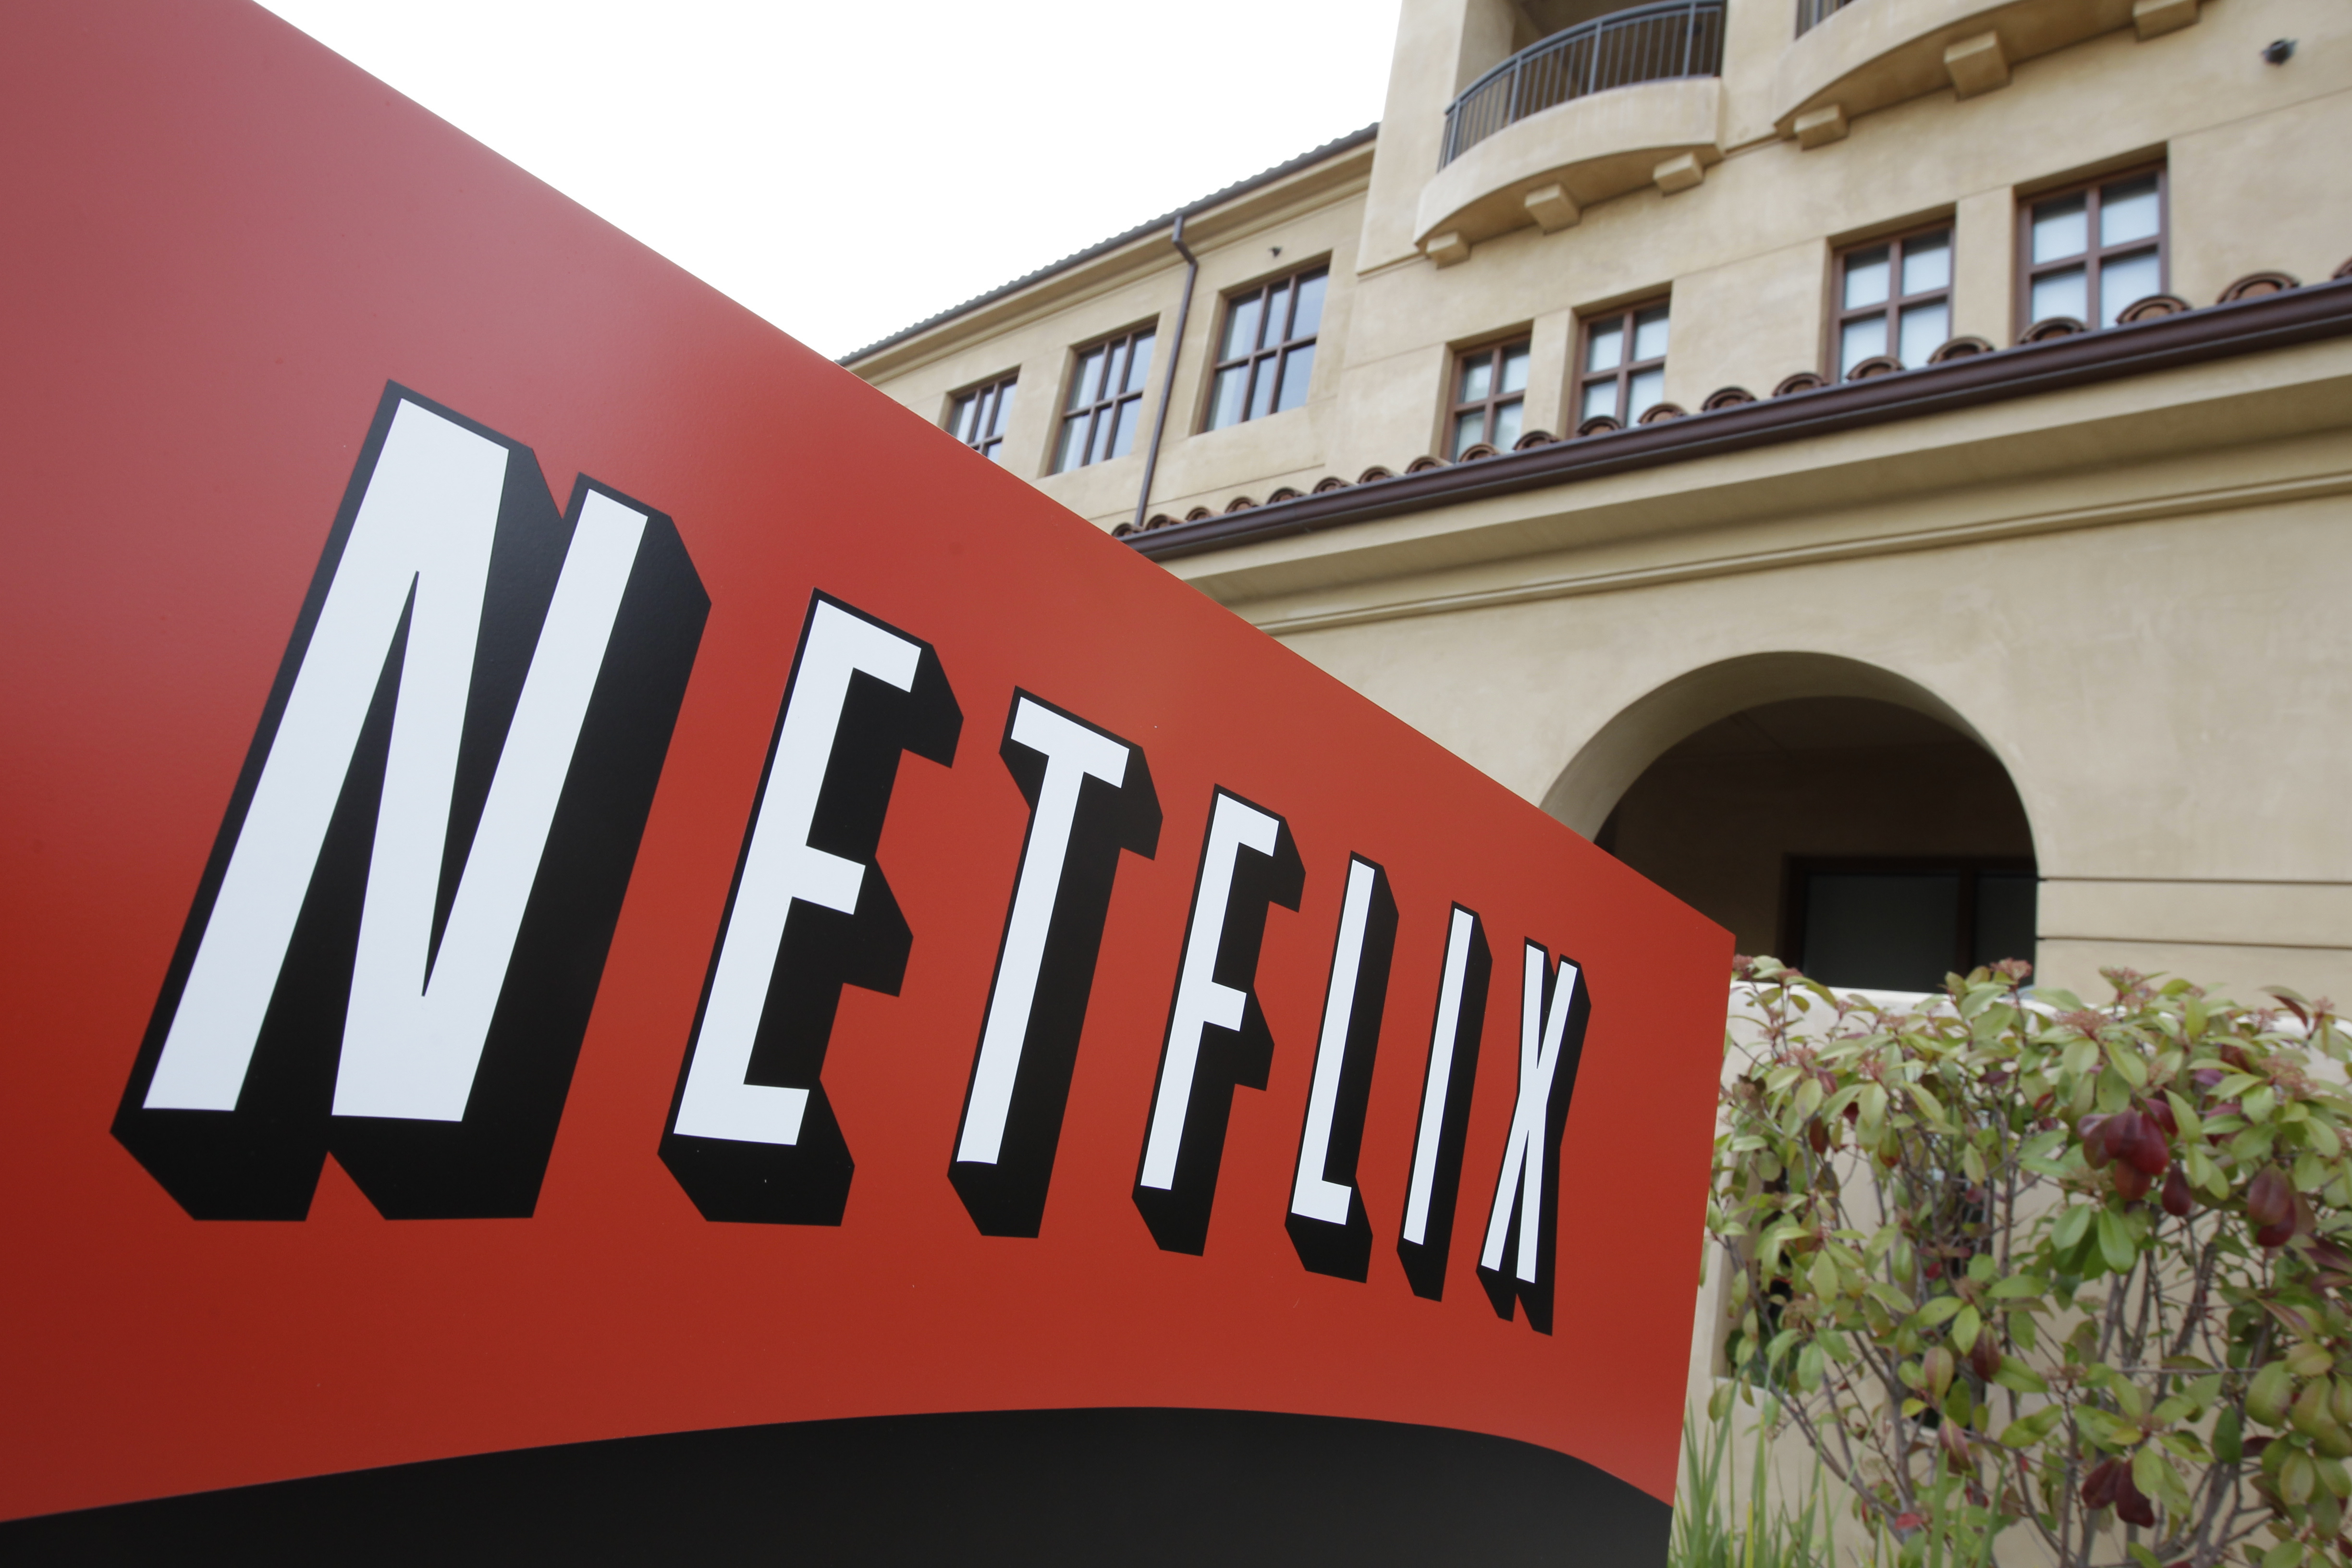 FILE - This March 20, 2012 file photo shows Netfilx headquarters in Los Gatos, Calif. Netflix on Thursday, Oct. 8, 2015 announced it is raising the price of its Internet video service by $1 in the U.S. and several other countries to help cover its escalating costs for shows such as 